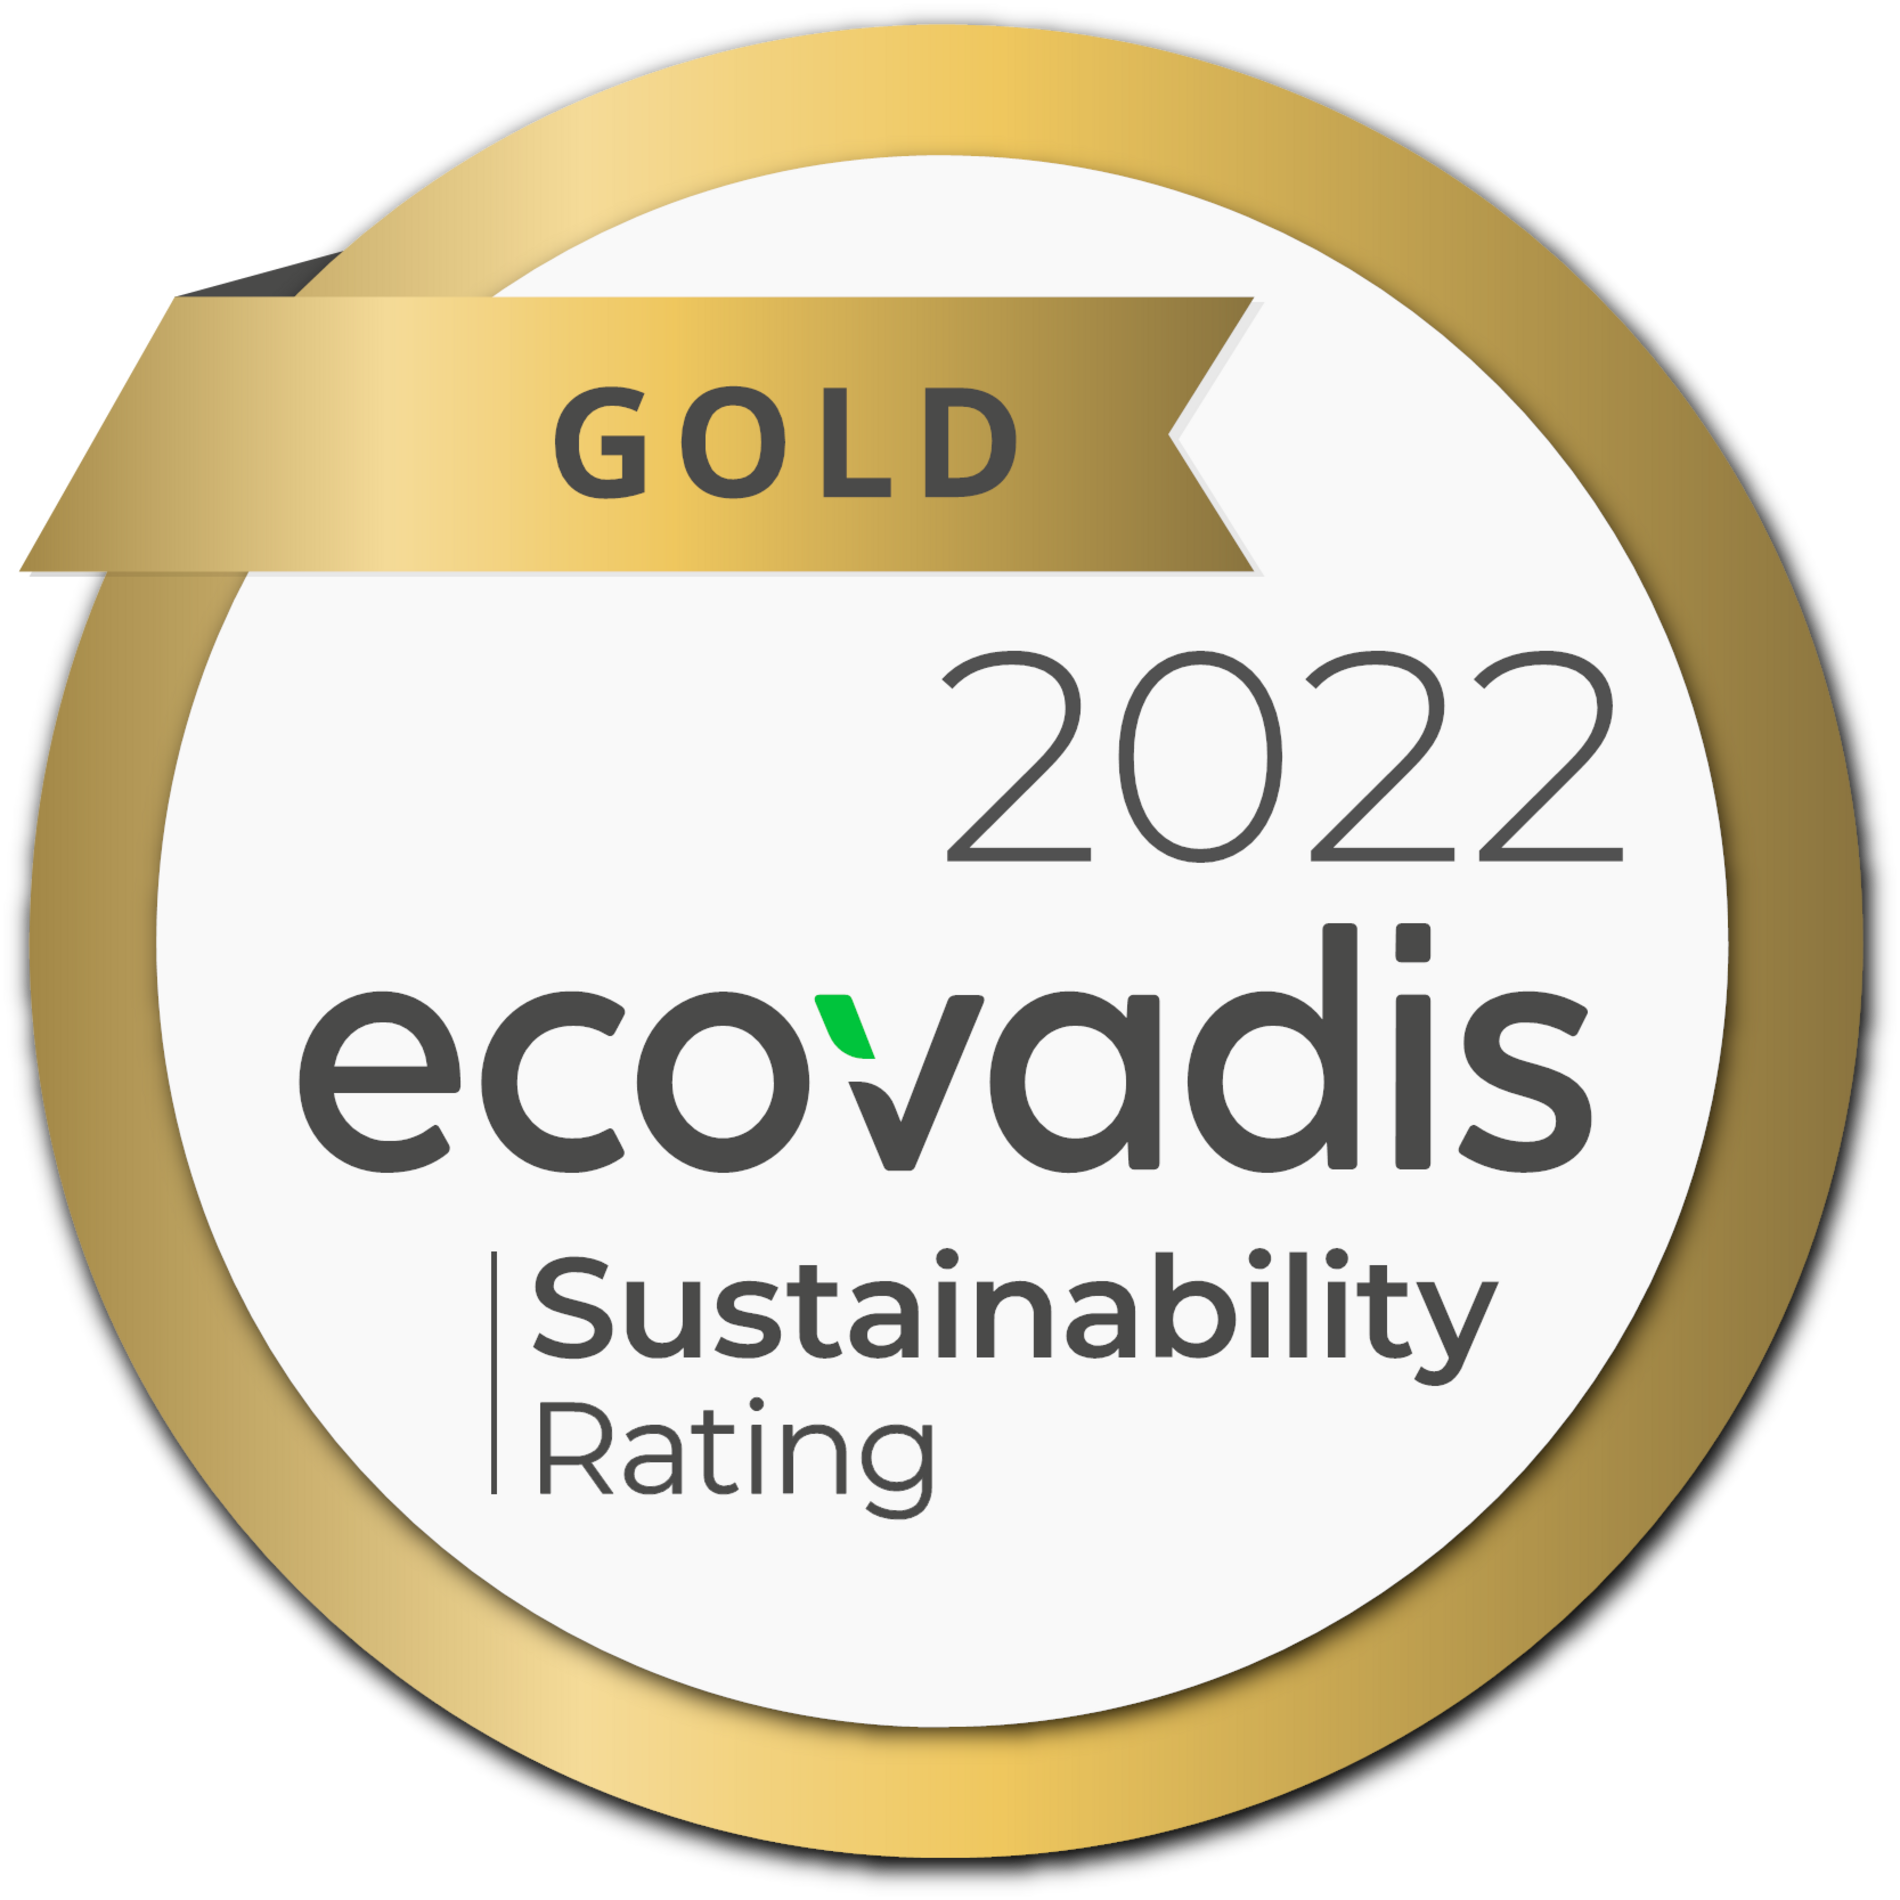 Fives group Gold 2022 Ecovadis Sustainability Rating